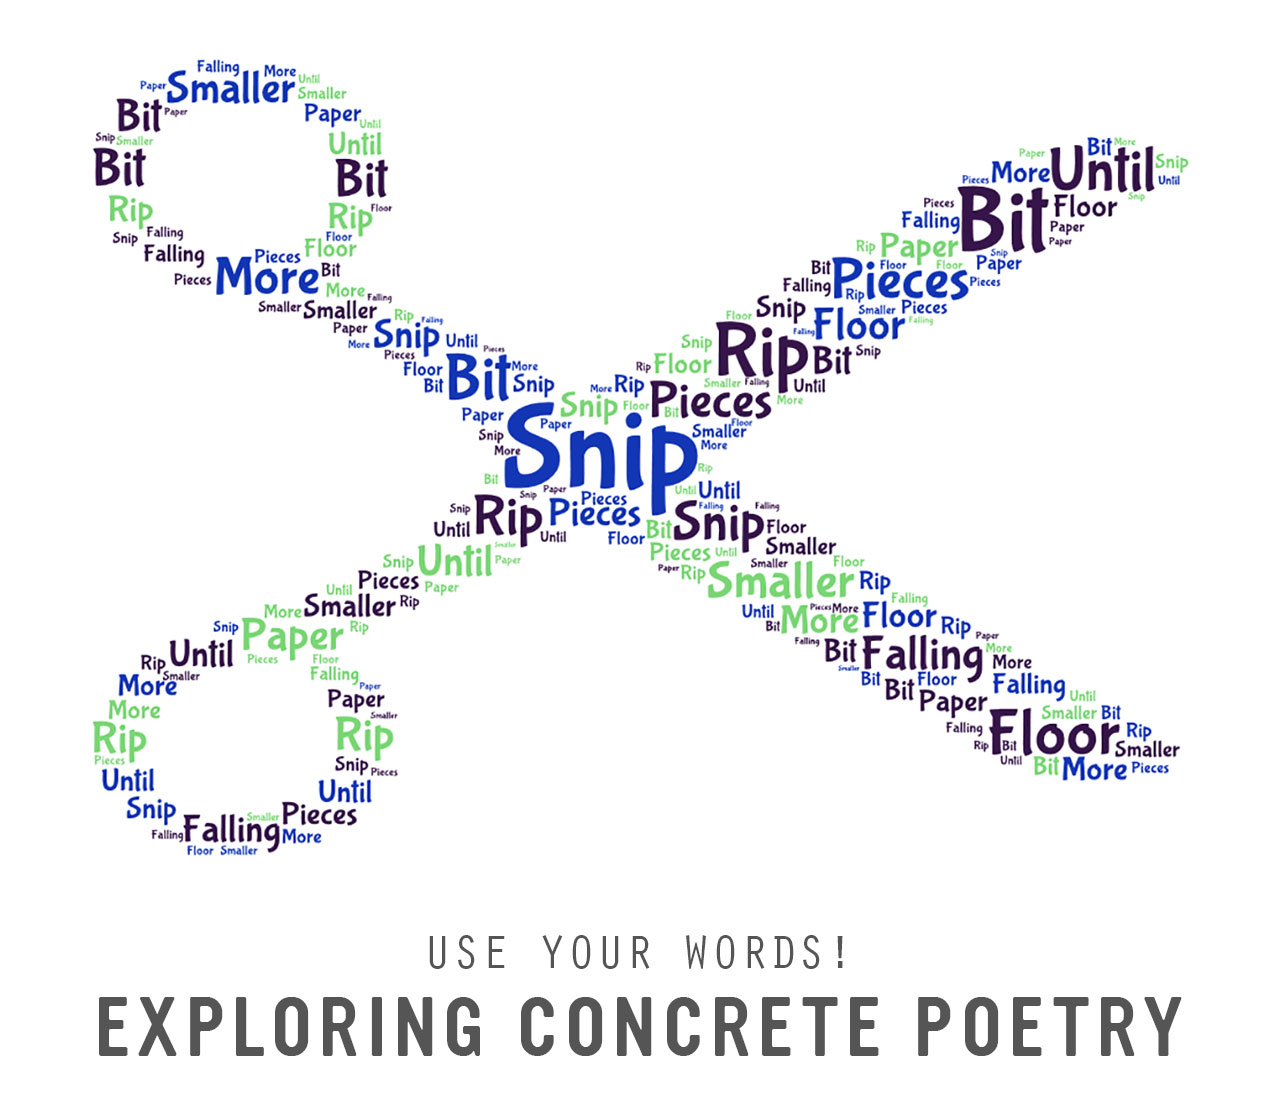 Use Your Words! Exploring Concrete Poetry